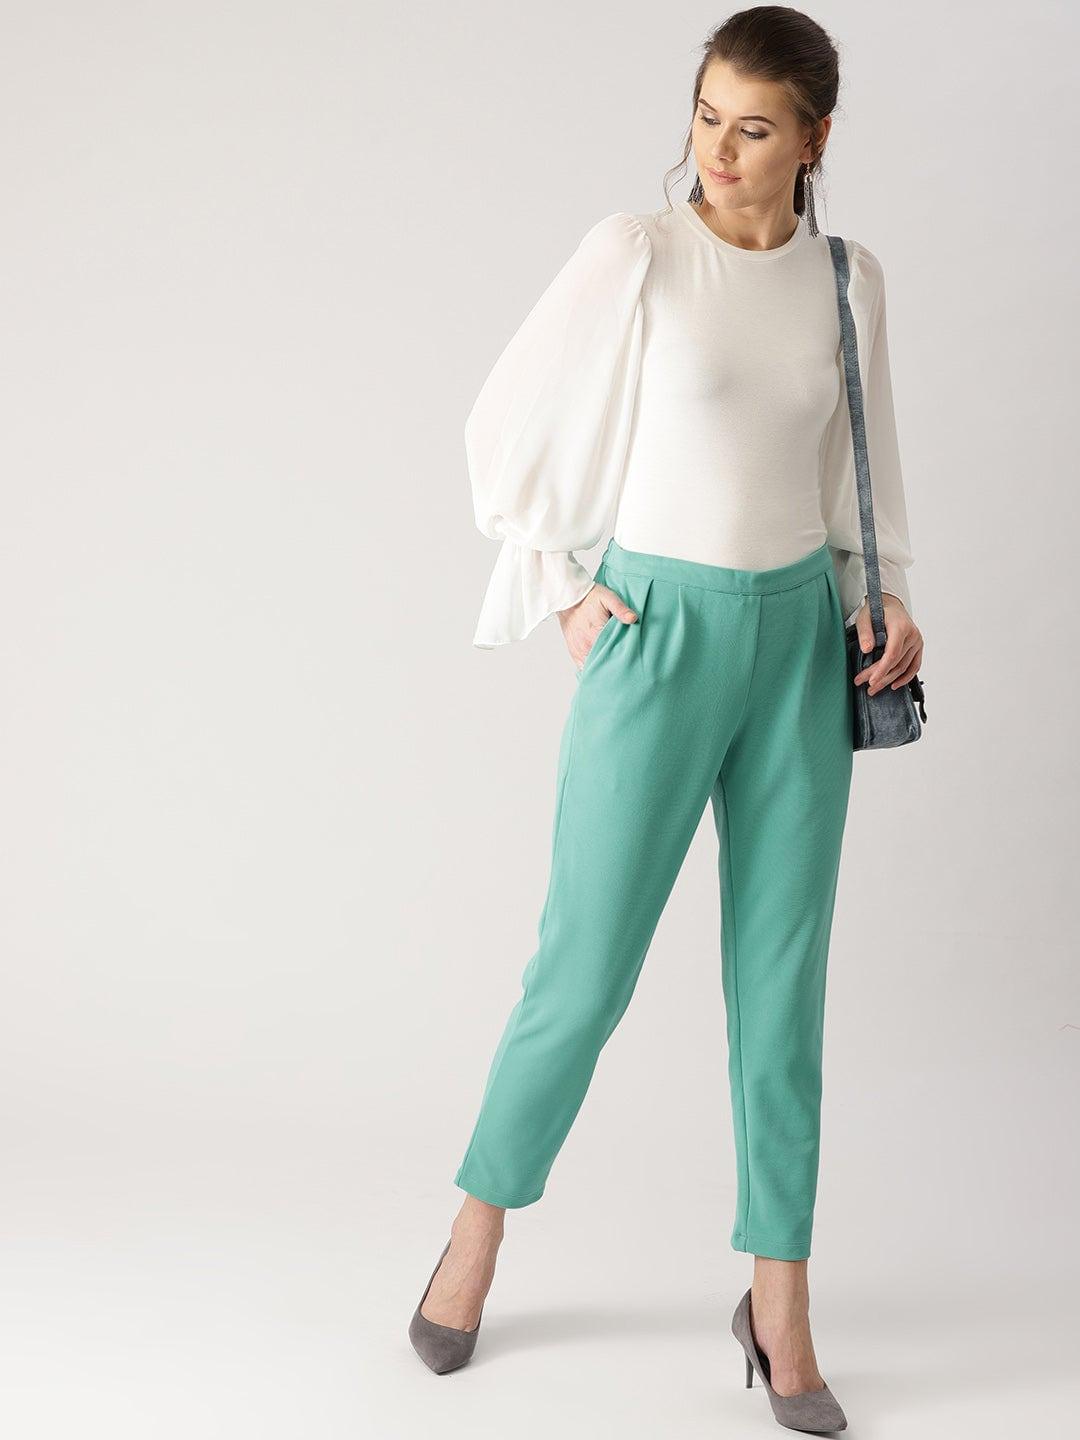 Green Solid Polyester Trousers